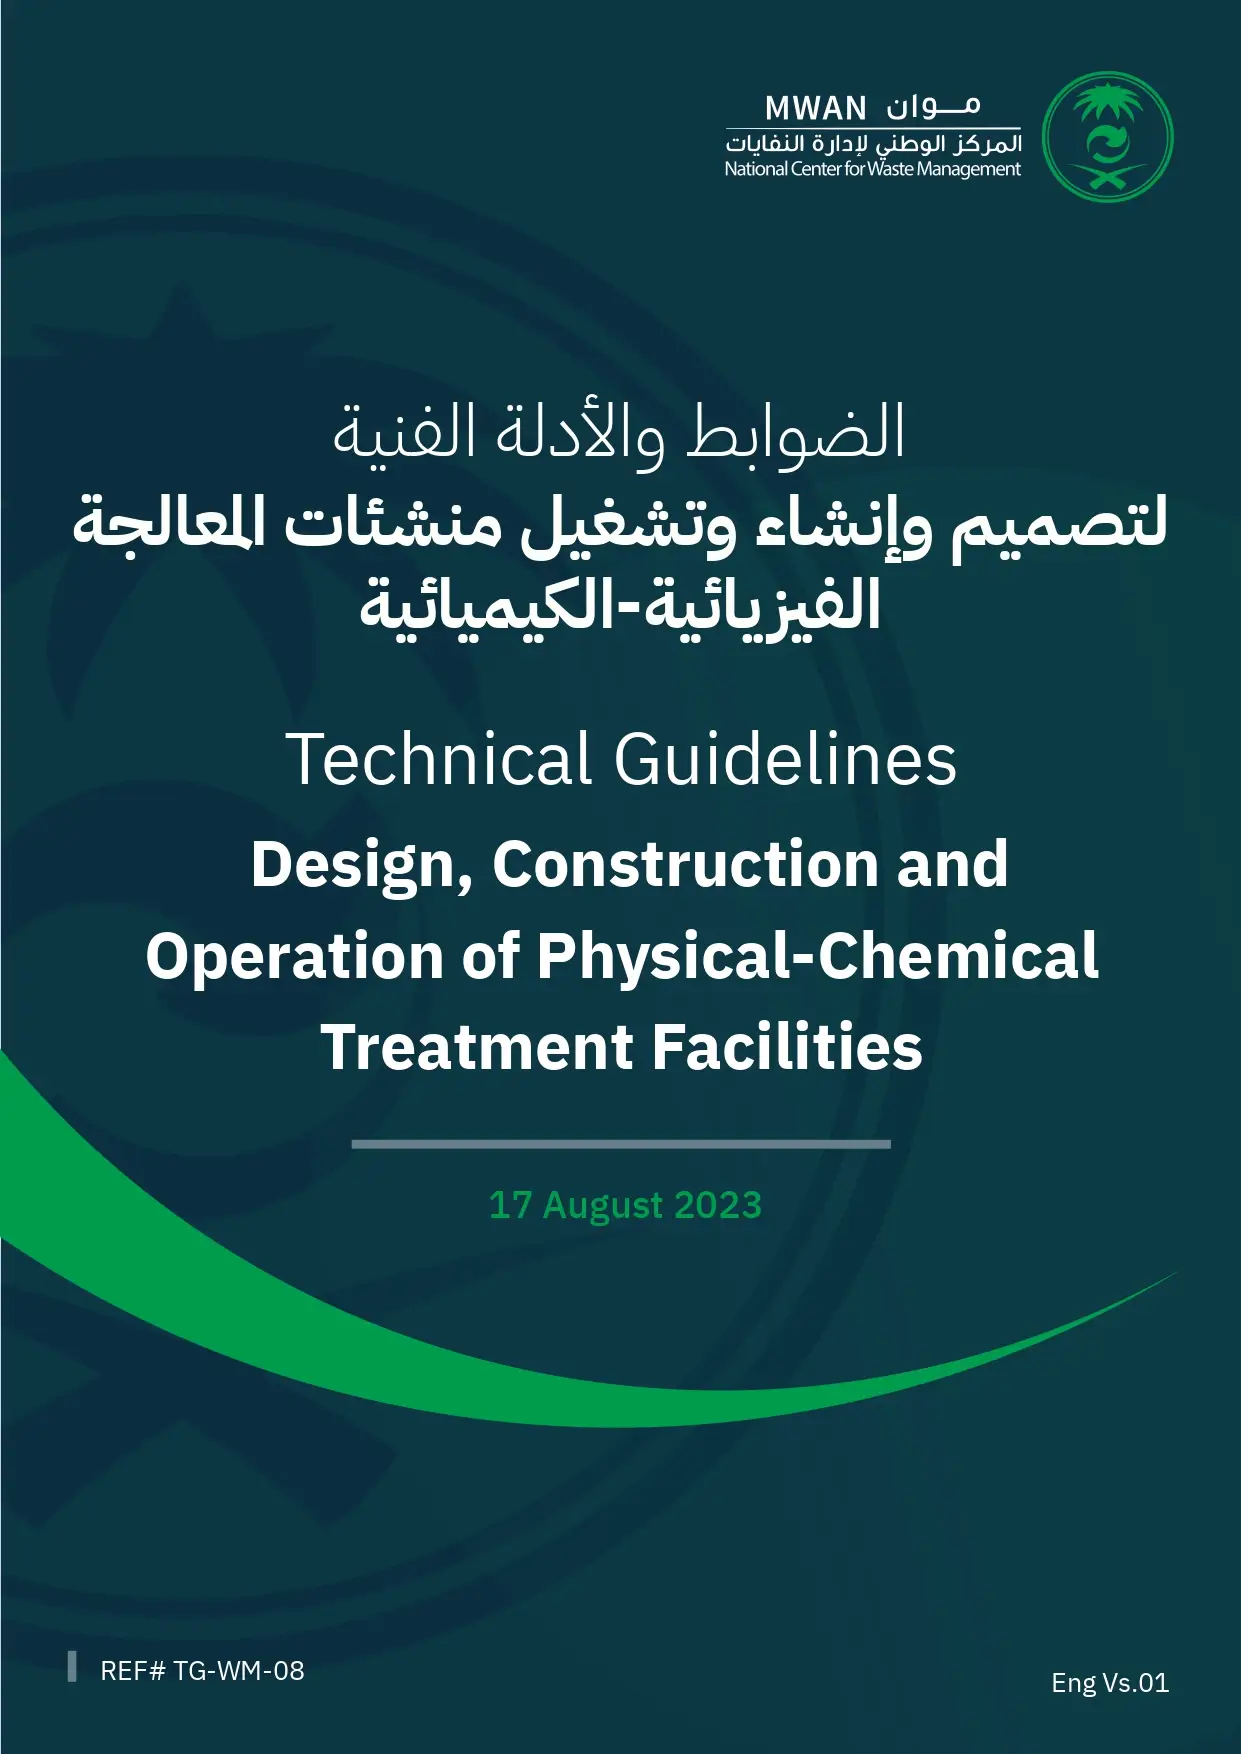 Technical Guidelines- Design, Construction And Operation Of Physical-Chemical Treatment Facilities